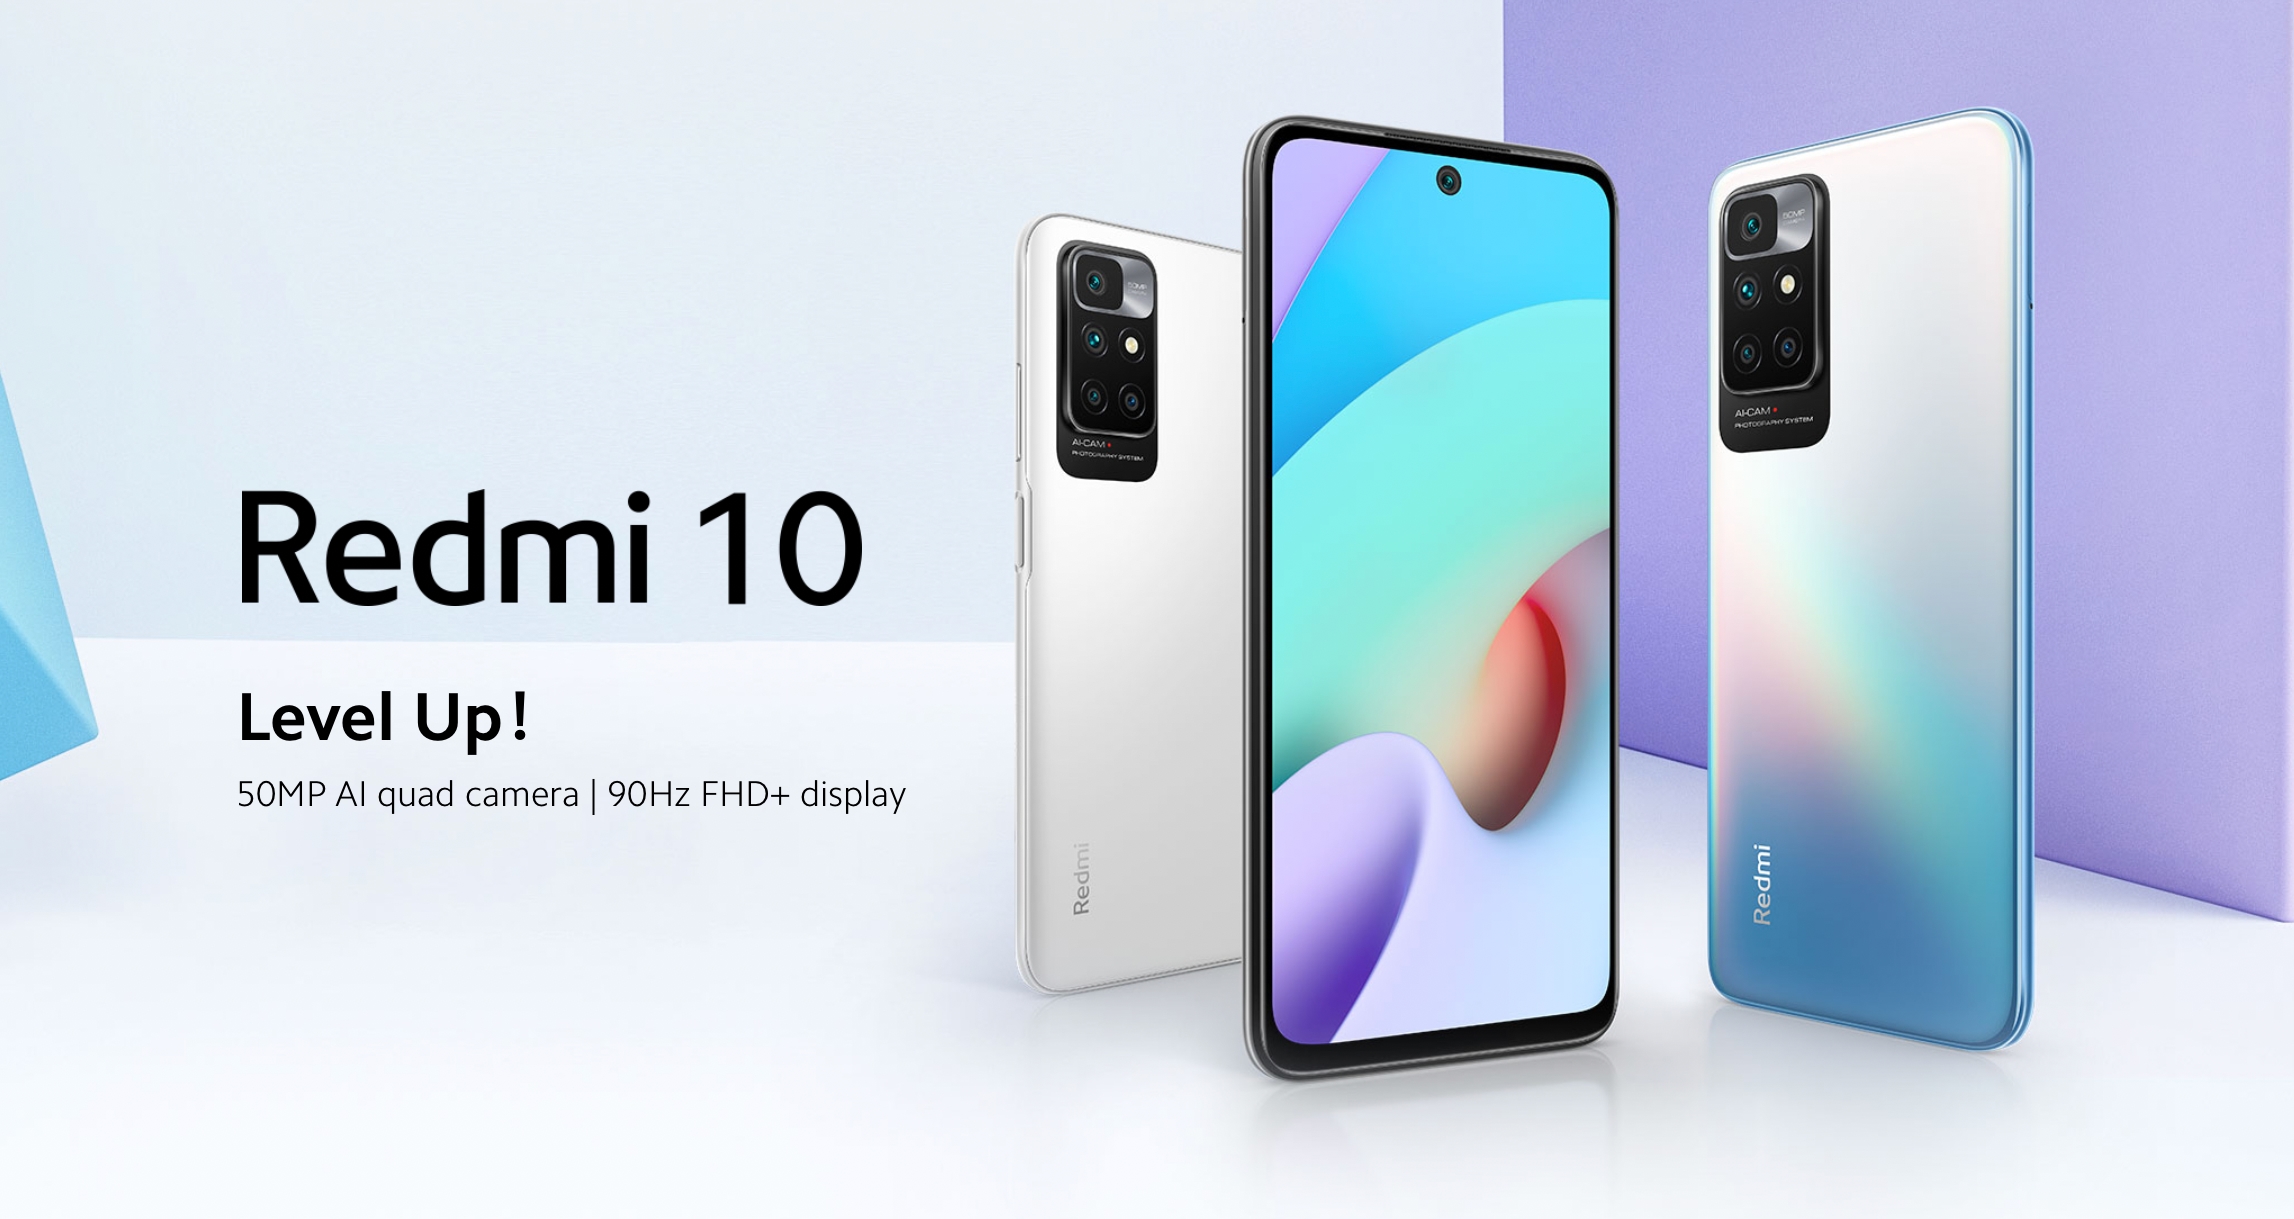 Redmi 10: budget smartphone with 90Hz screen, MediaTek Helio G88 chip, 50MP quad-camera and stereo speakers priced from $179